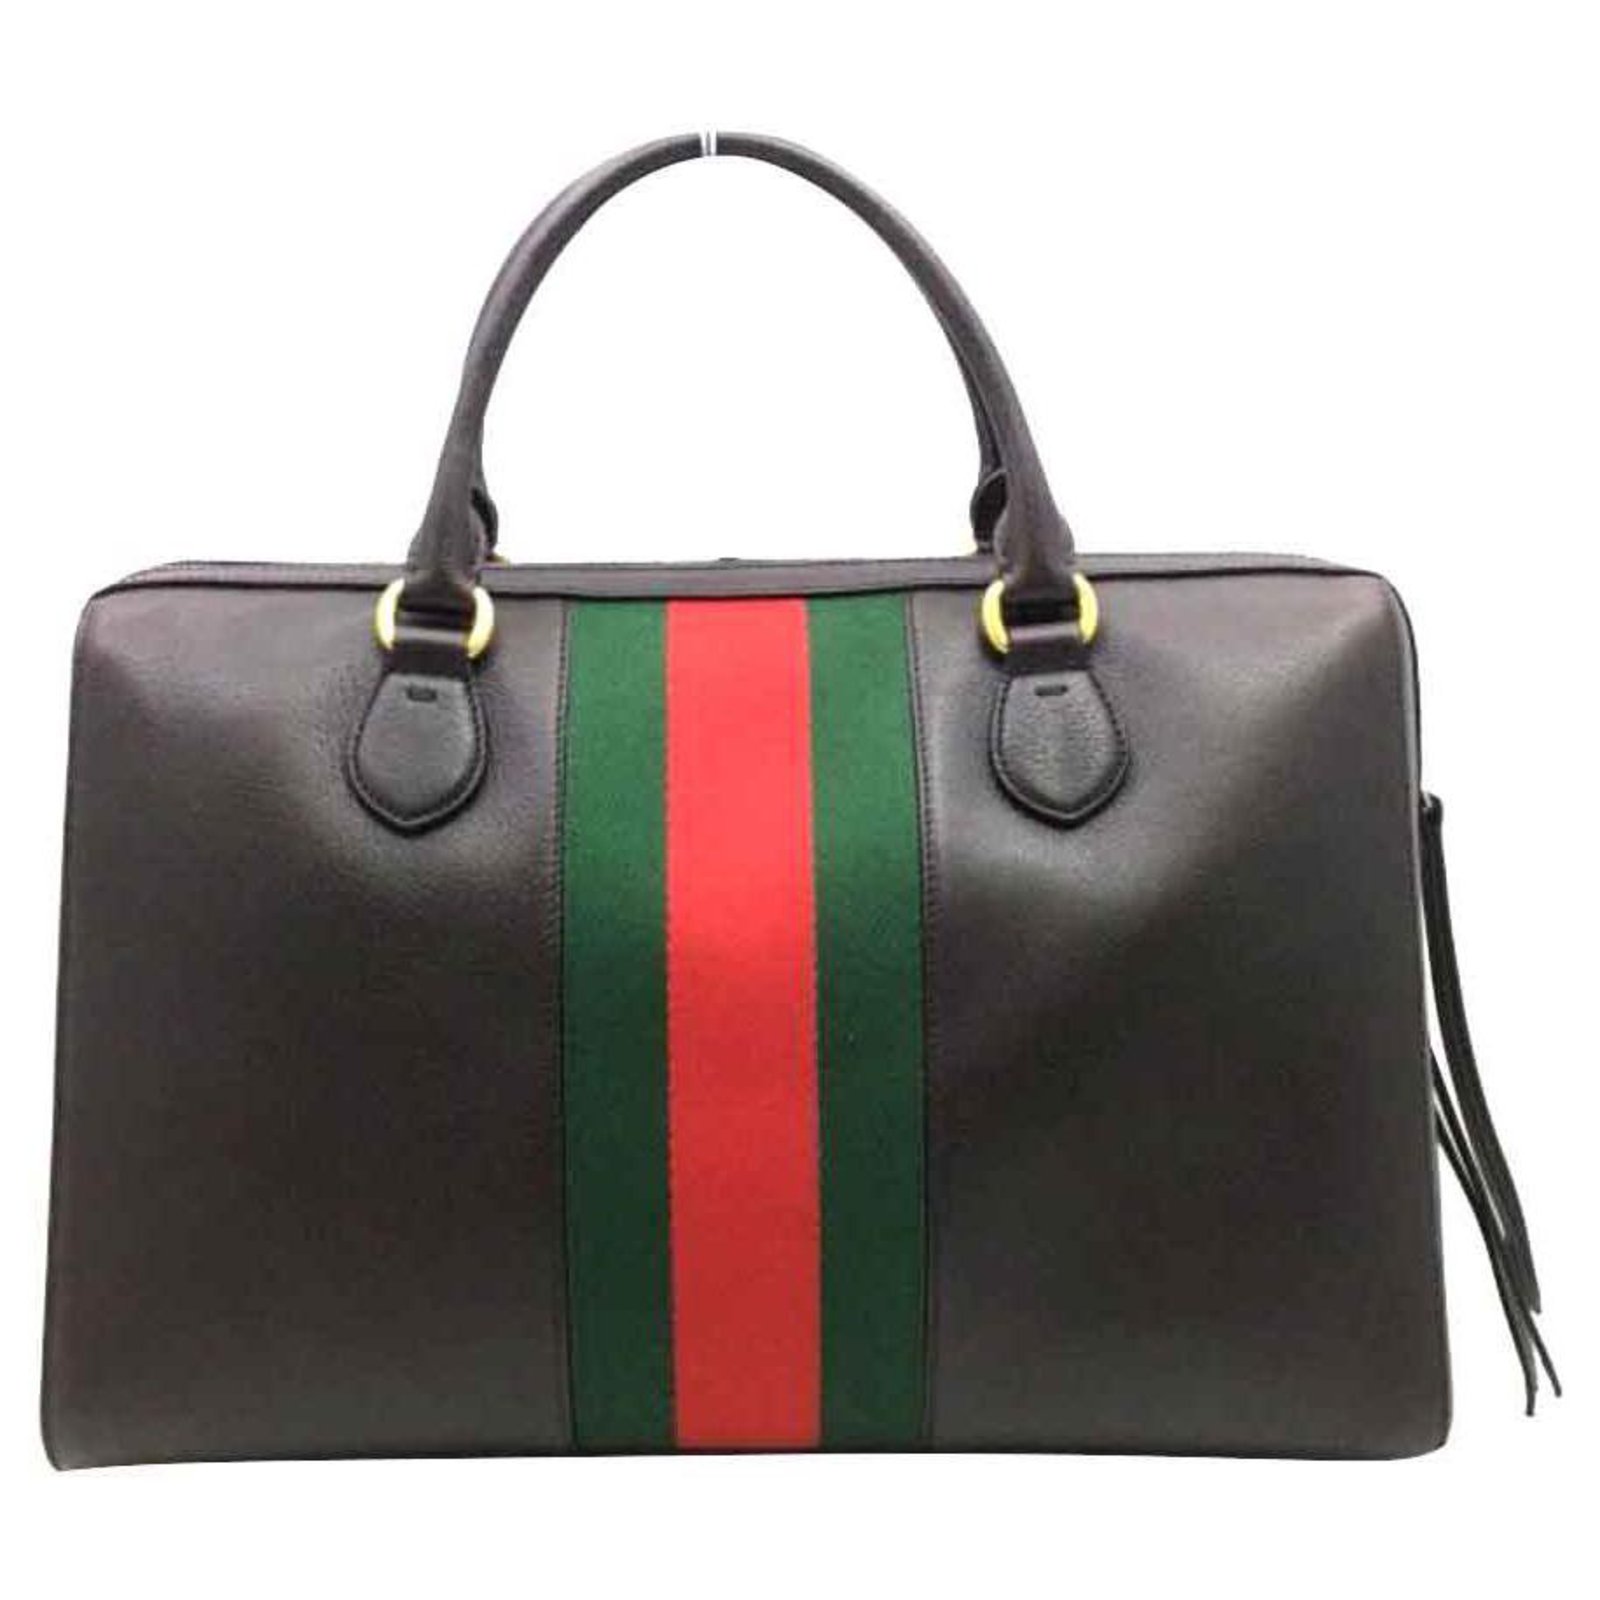 Gucci Gucci leather carry all bag 